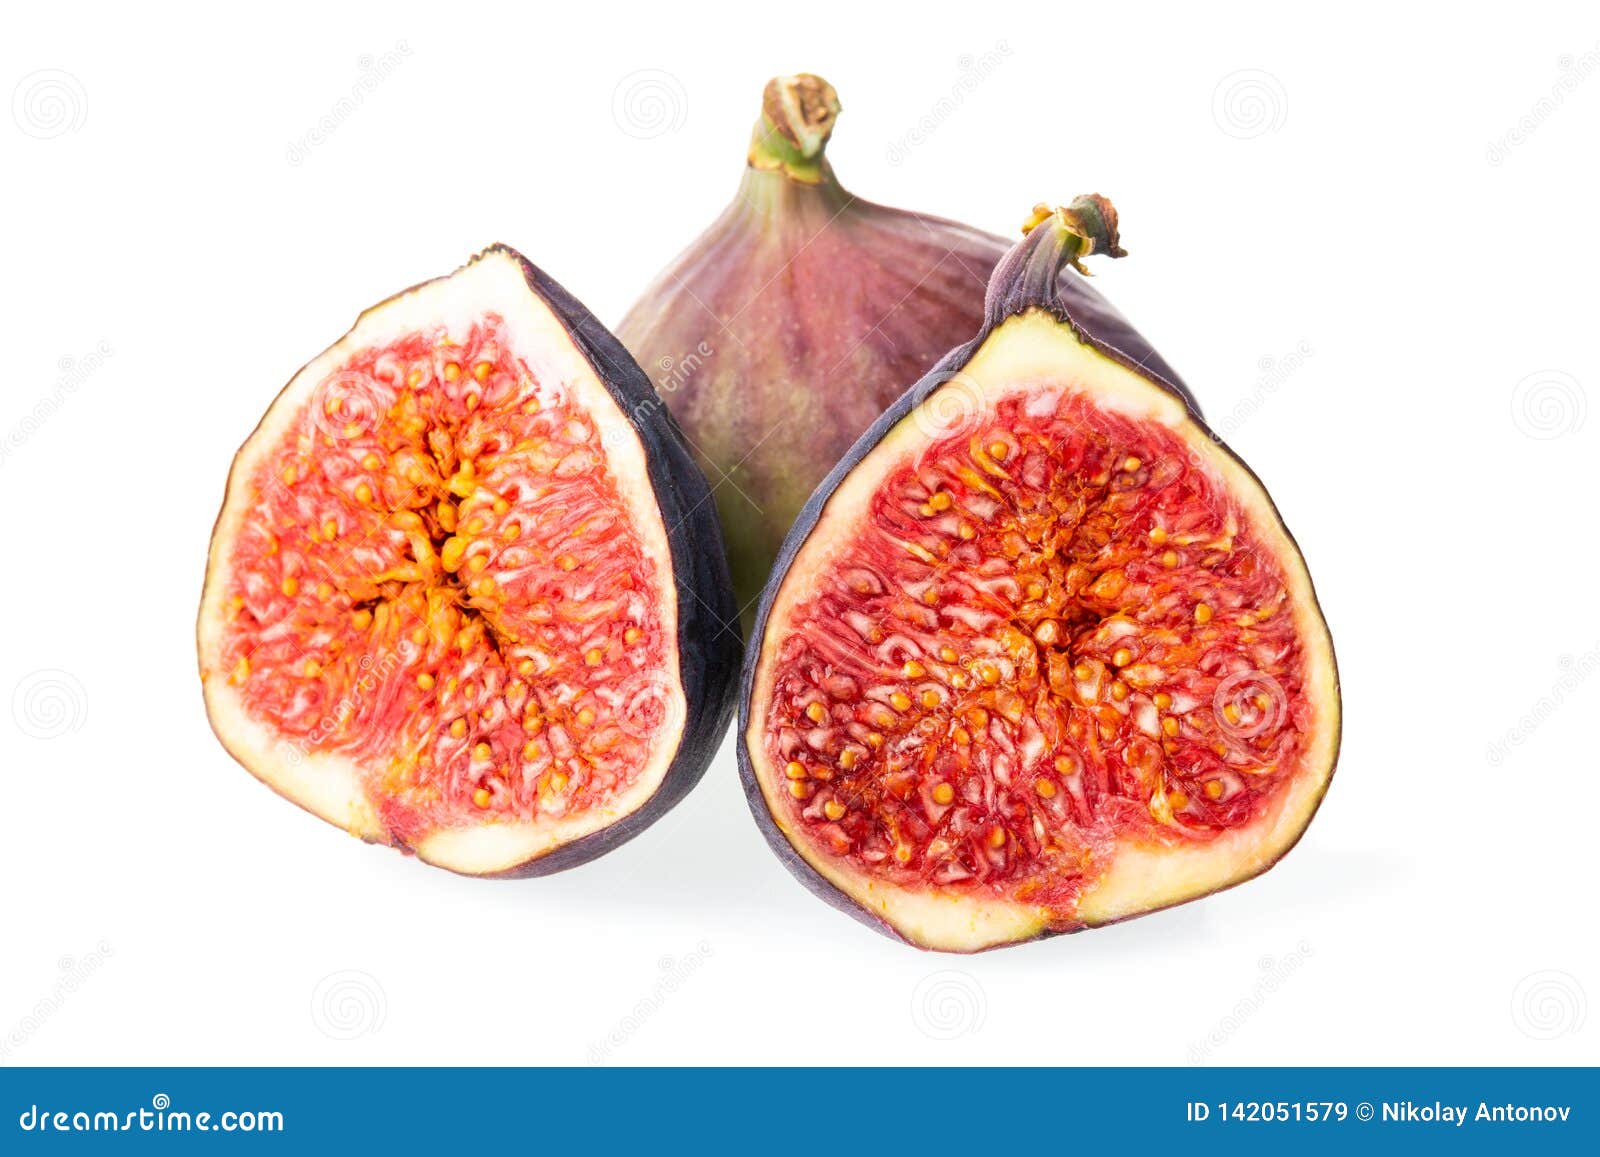 Pieces Of Fresh Fig Fruit Isolated On White Background Stock Image Image Of Healthy Figs 